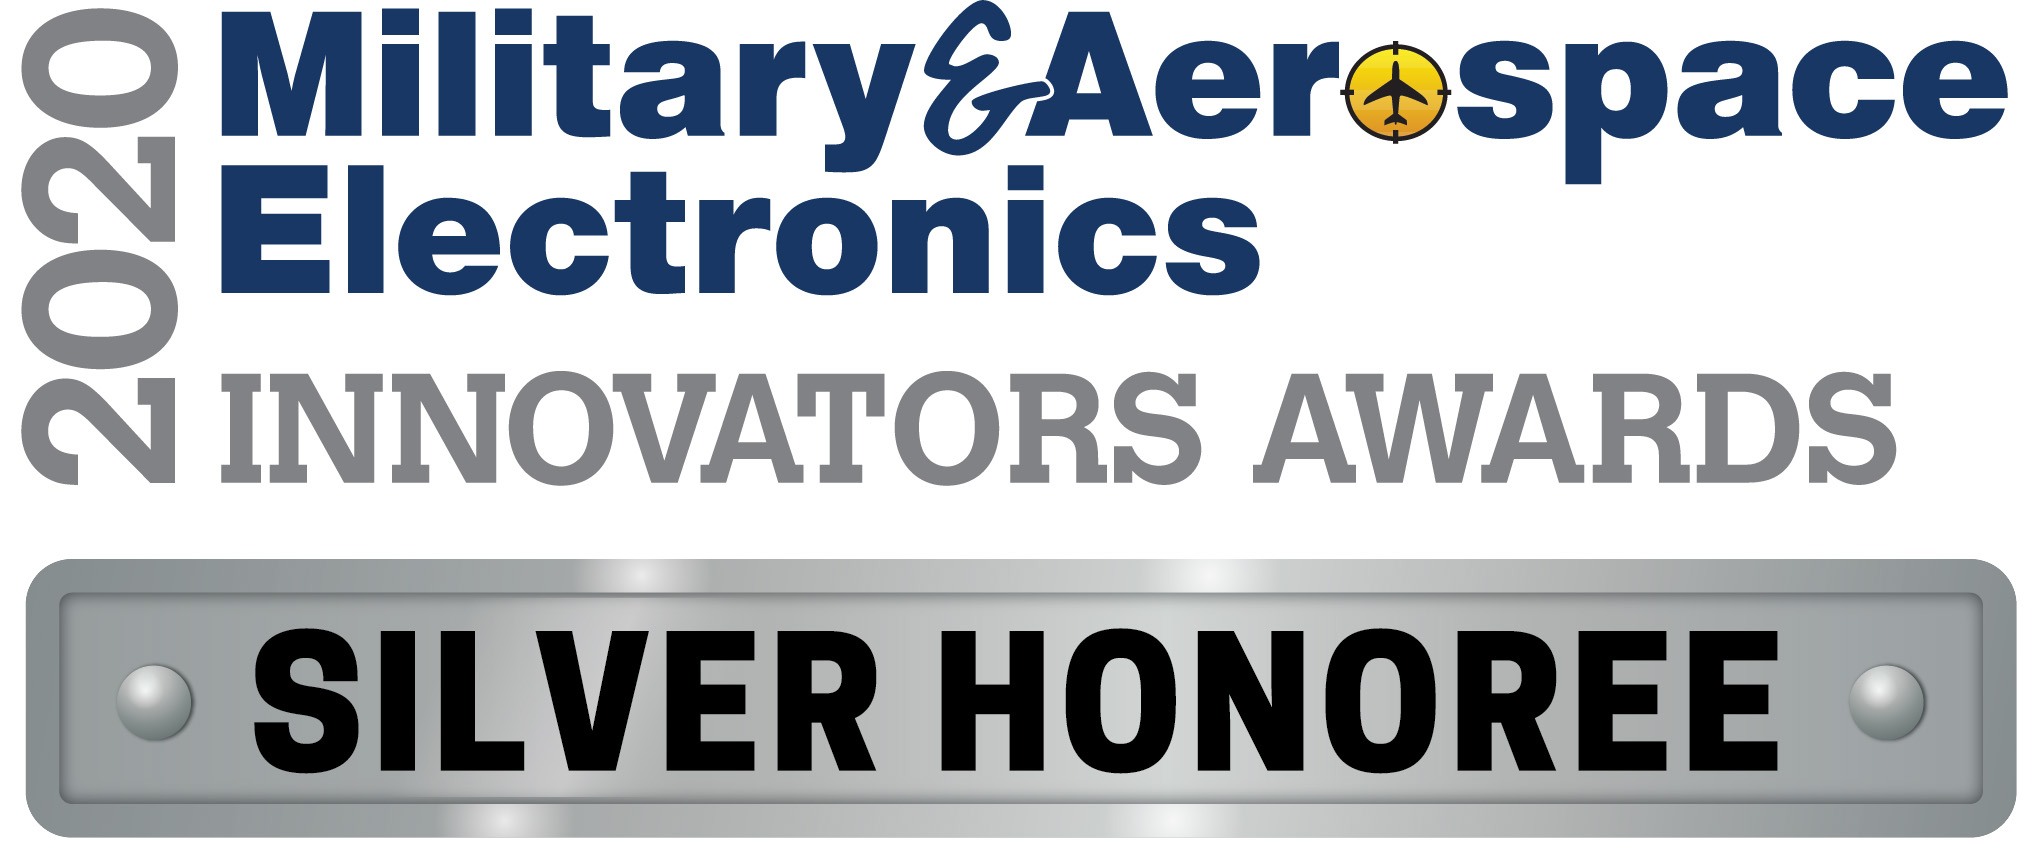 Discovery Semiconductors MAE Silver Honoree 2020